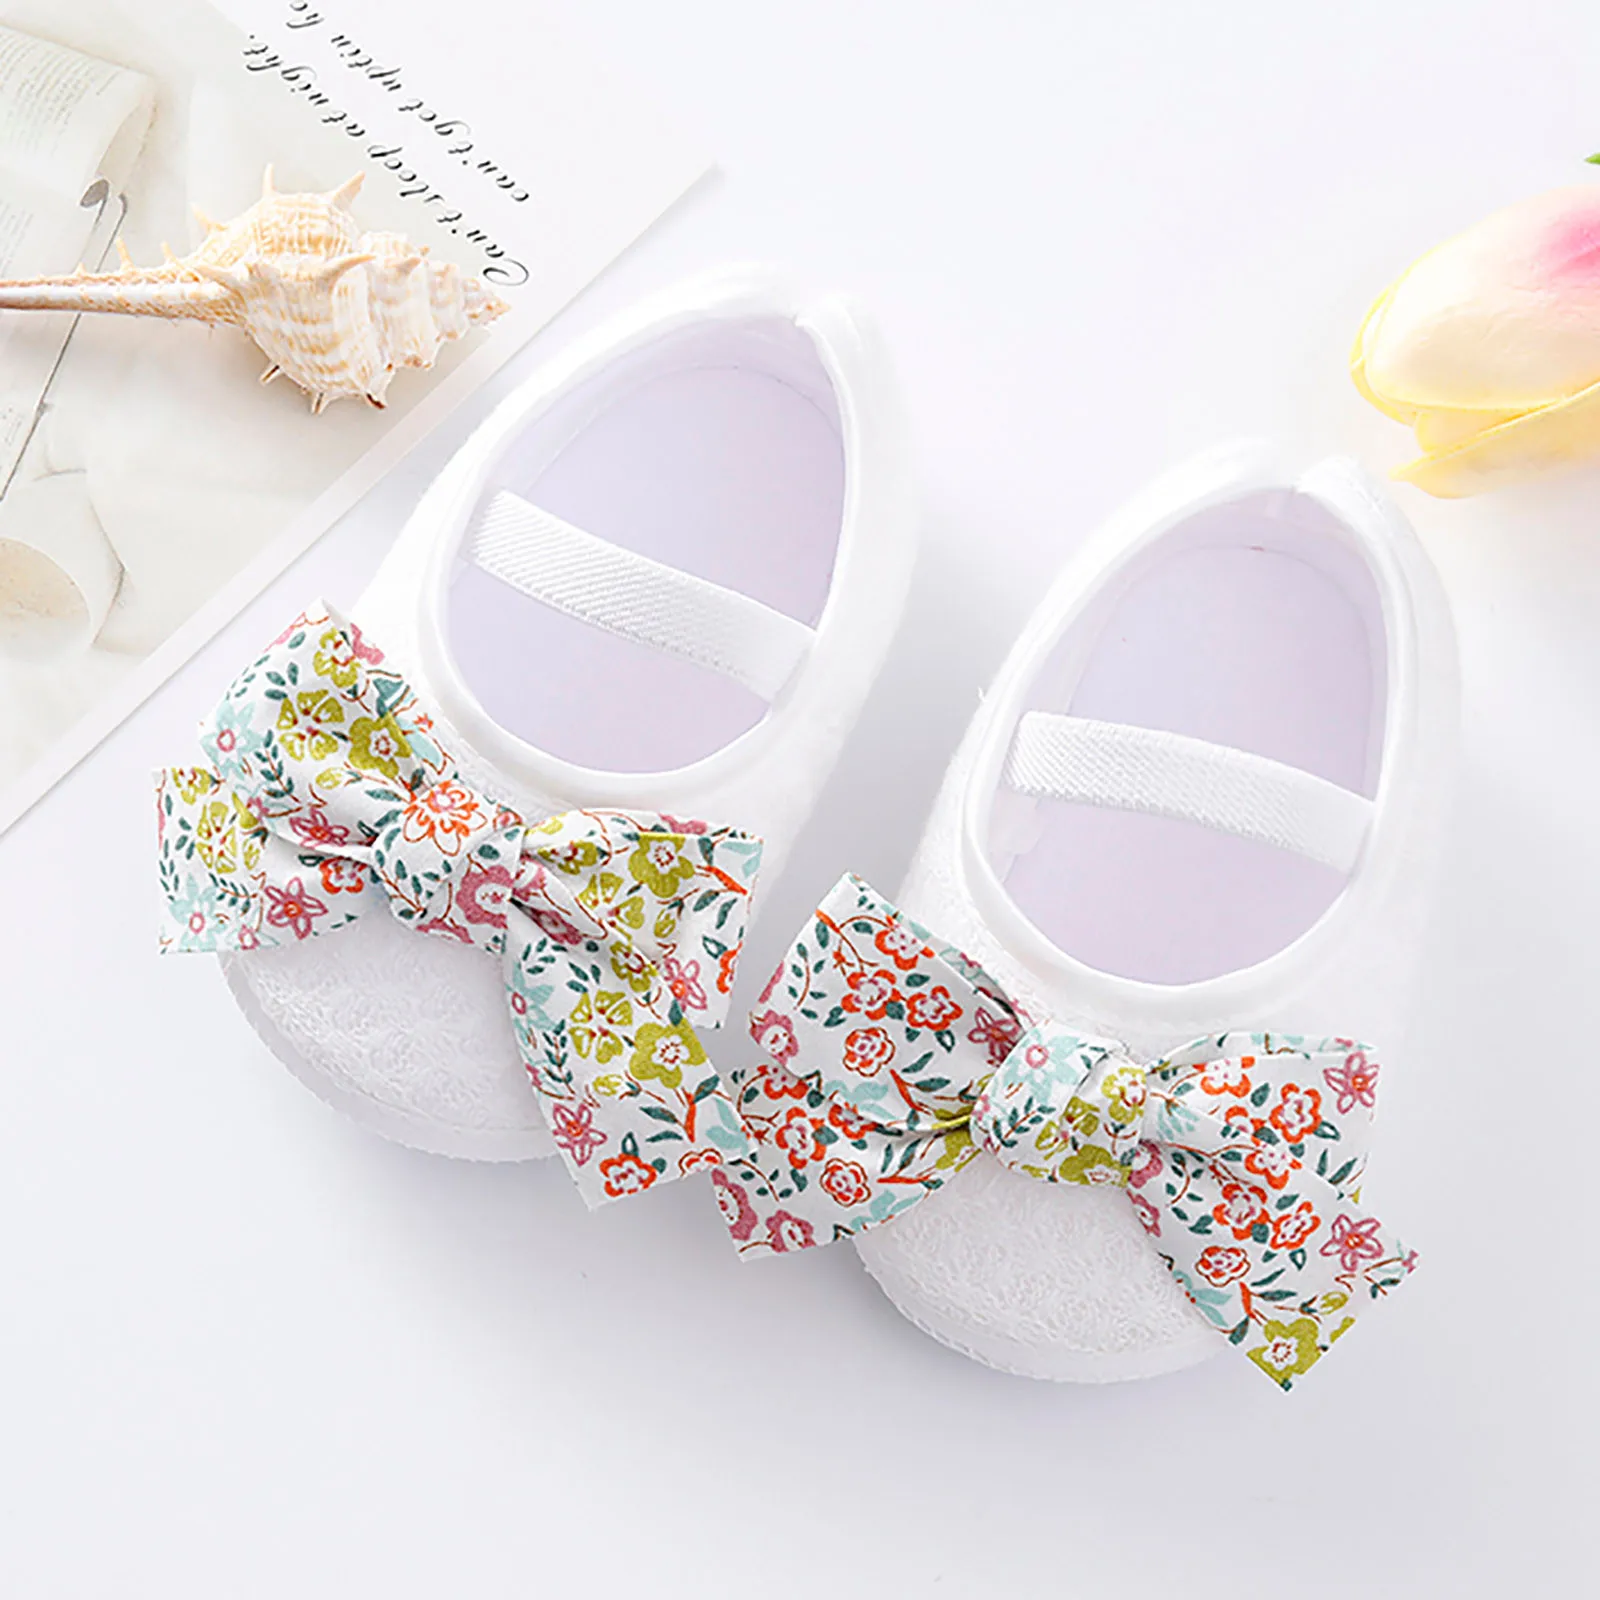 New Baby Girls First Walkers Soft Toddler Shoes Infant Toddler Walkers Shoes Bowknot Casual Princess Shoes кроссовки детские 2